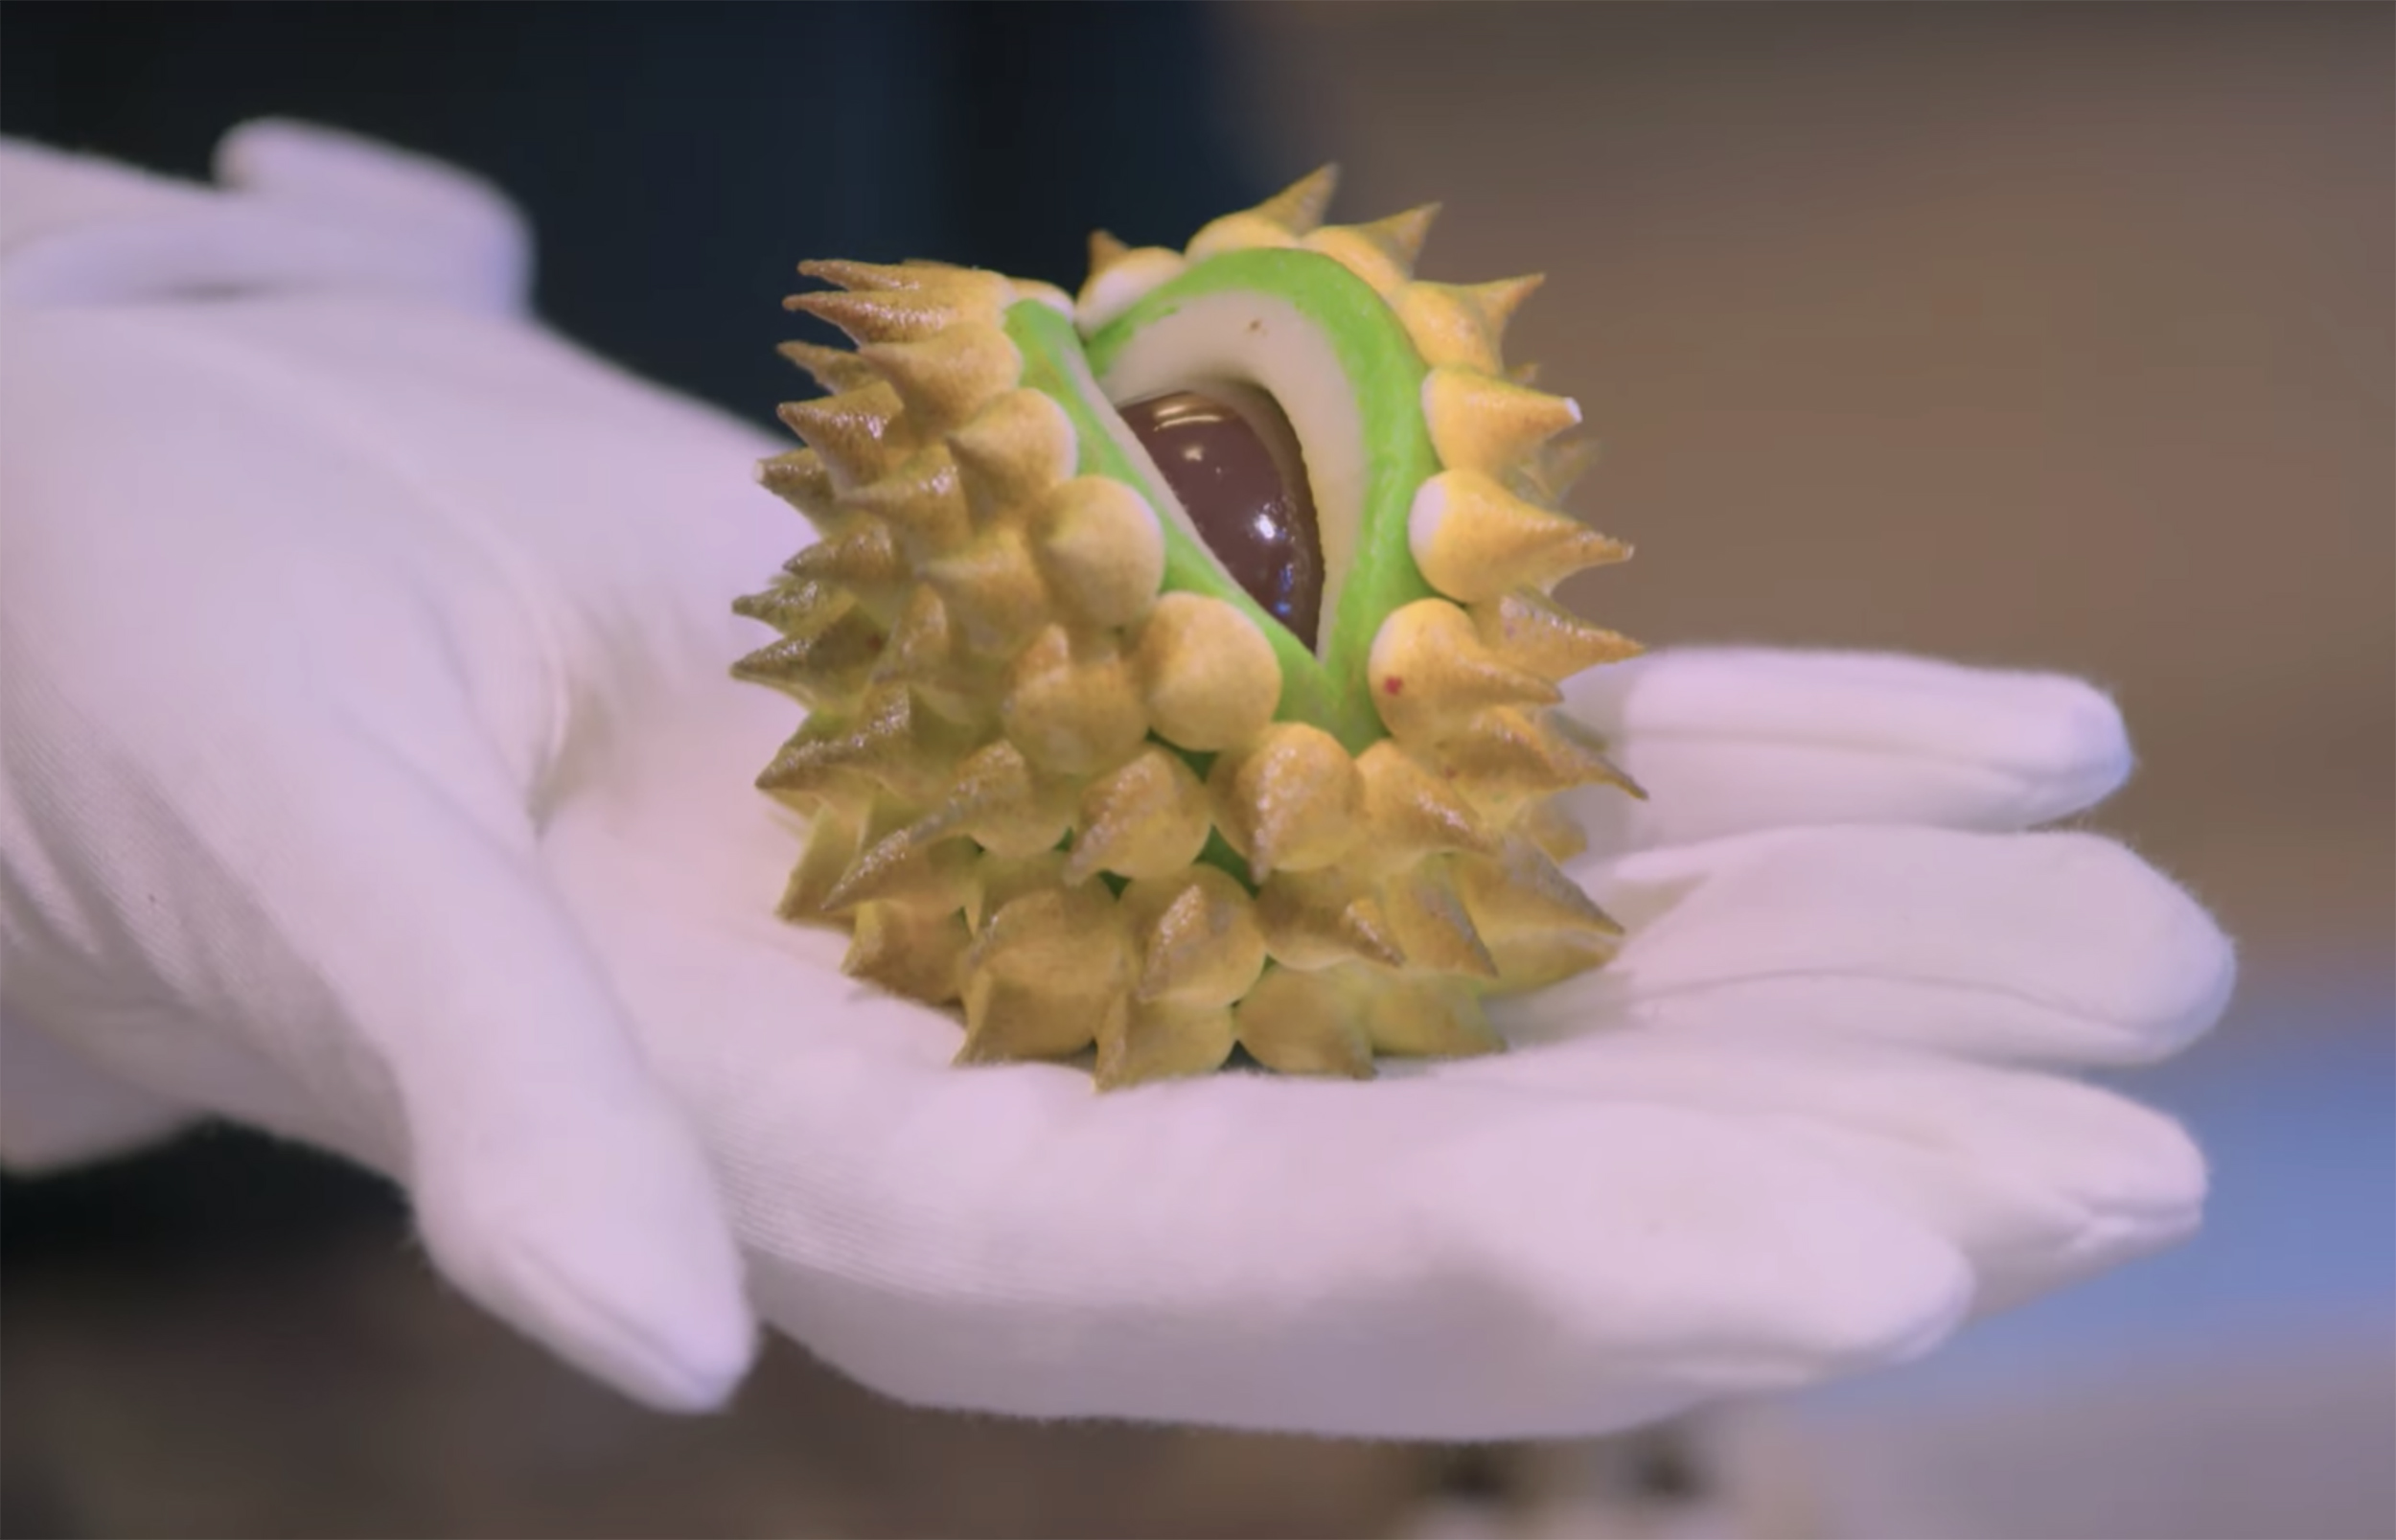 A spiky, green-and-yellow cocoa bulb